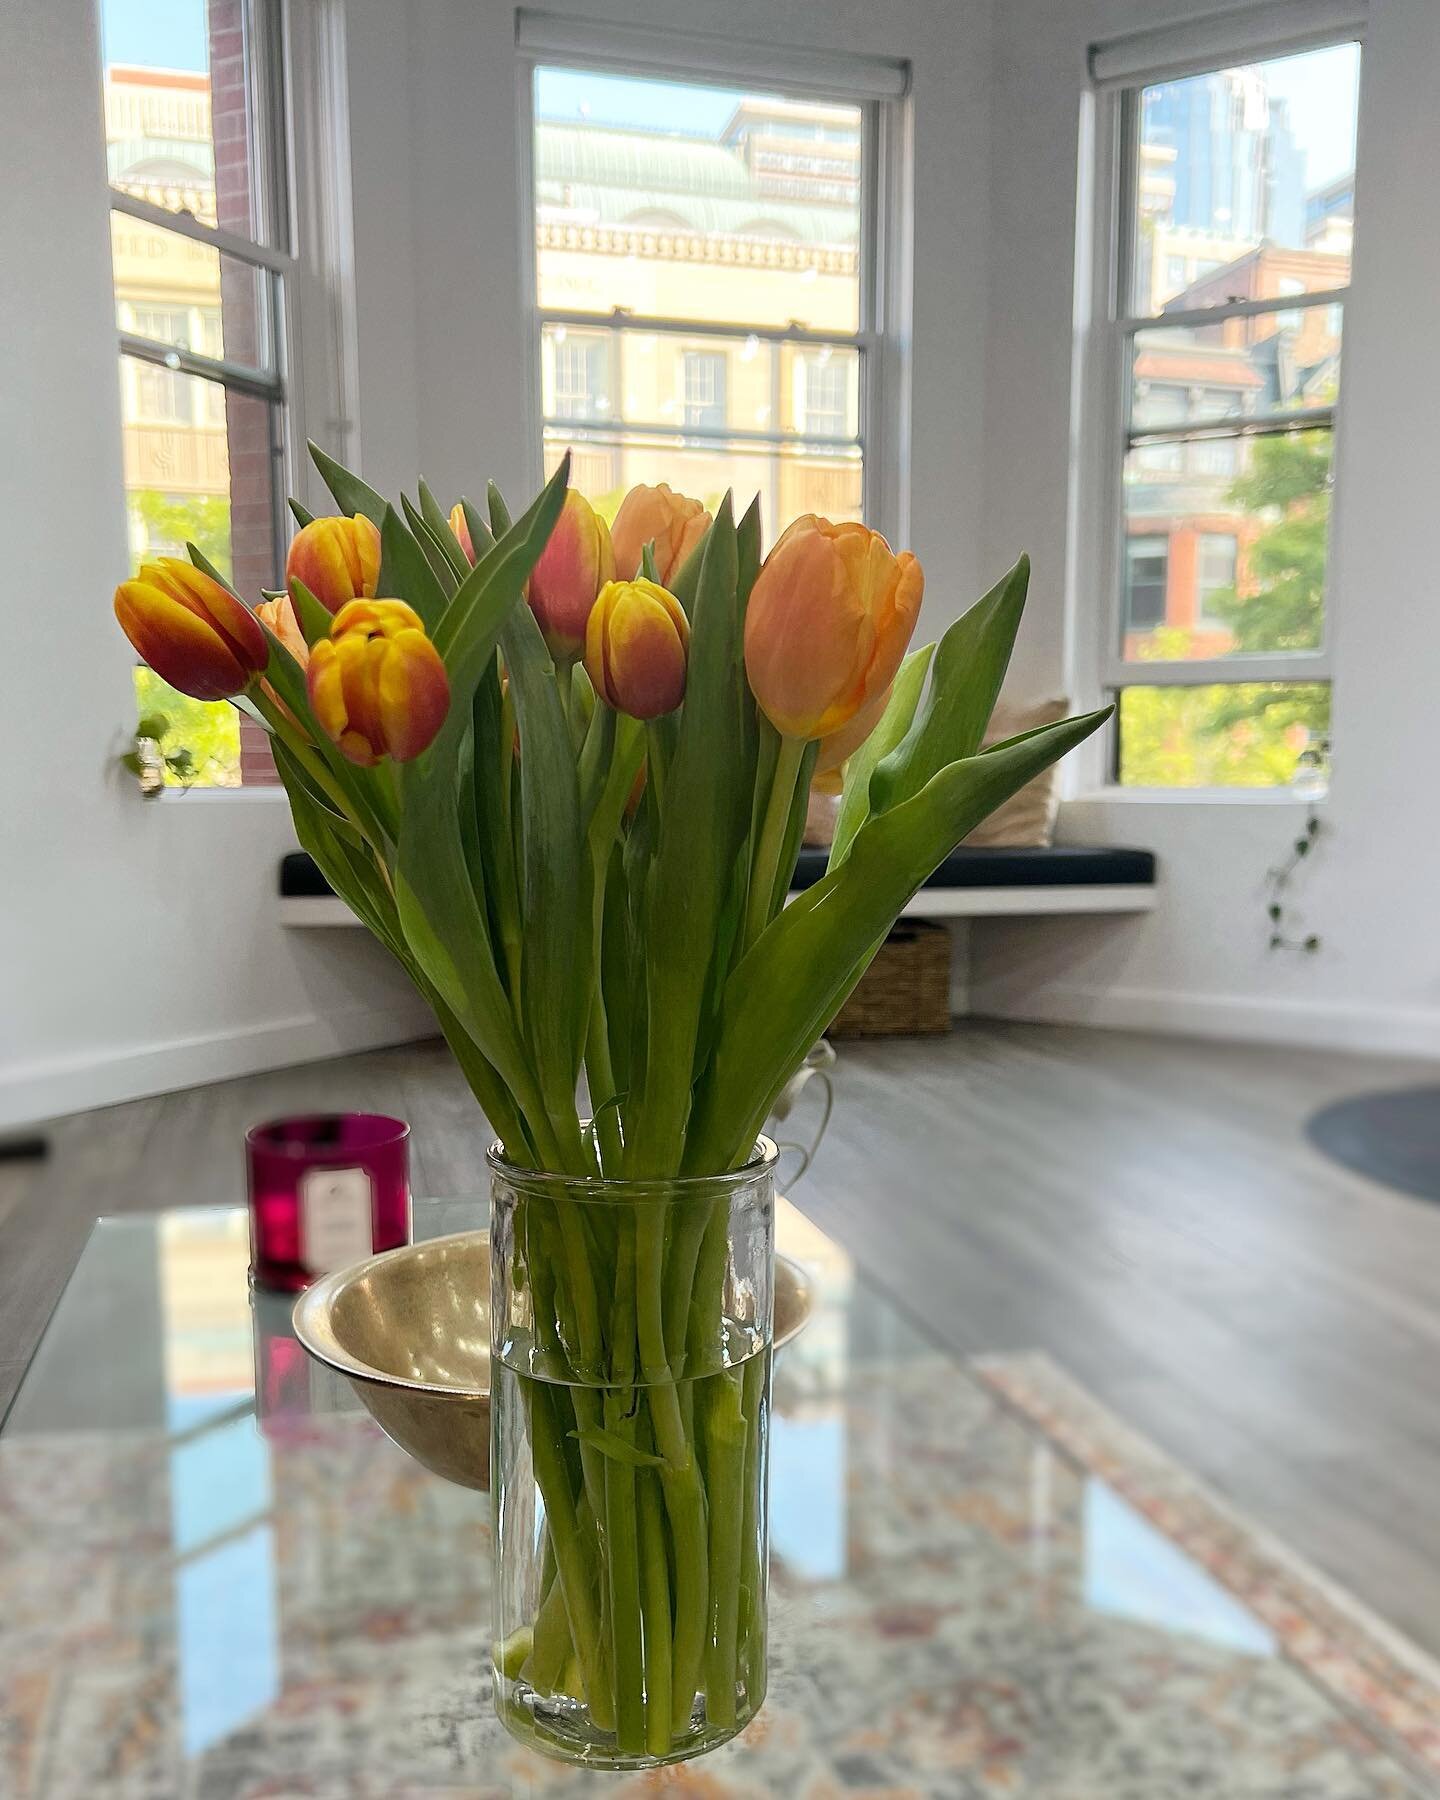 Summer breeze, windows open, fresh flowers 💐 We&rsquo;re so glad you&rsquo;re here to soak it in with us 💞